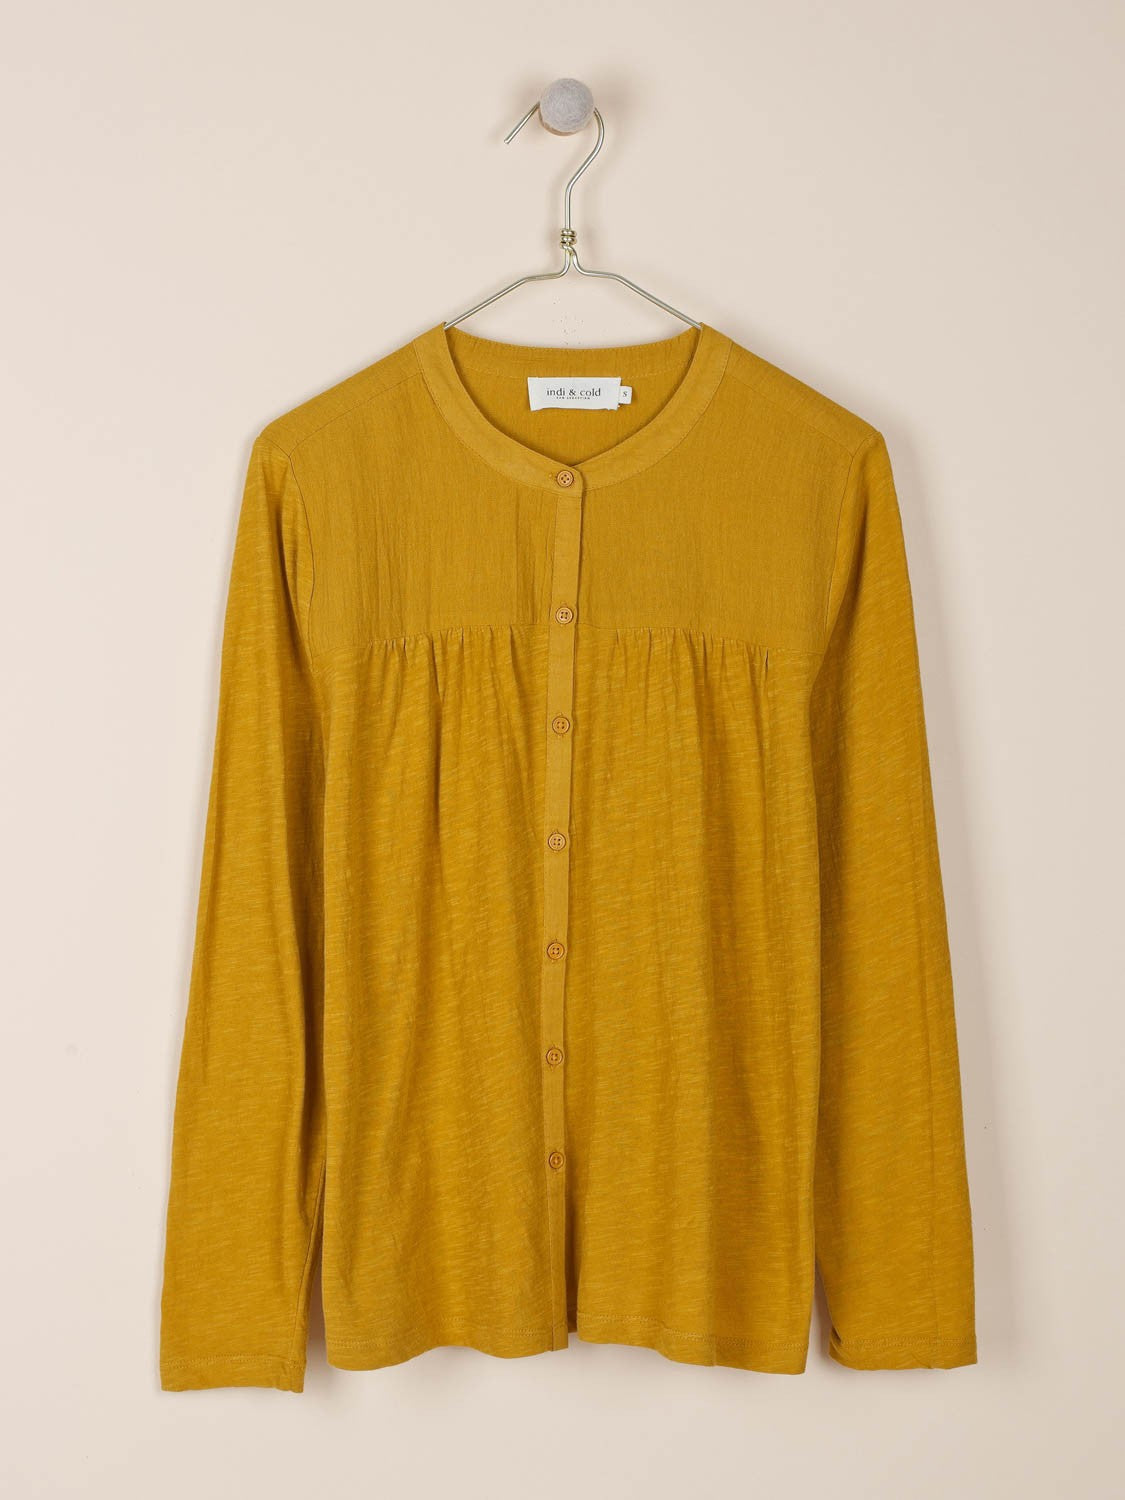 Embroidered Long Sleeve Top - loveindi.ie